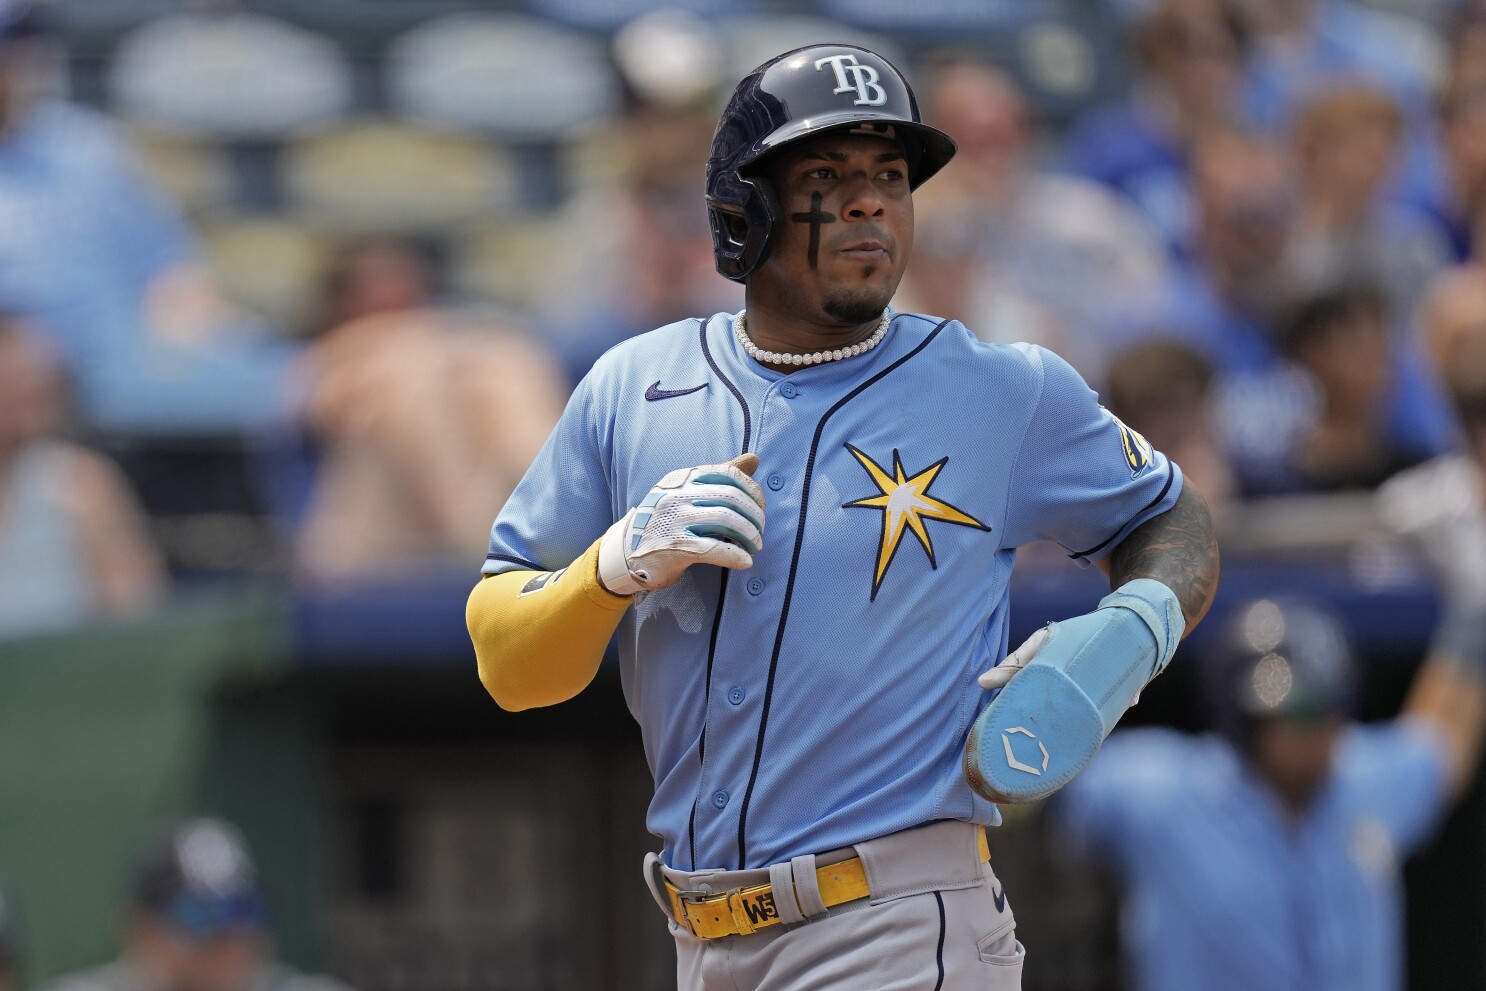 MLB could place Rays' Wander Franco on administrative leave Monday